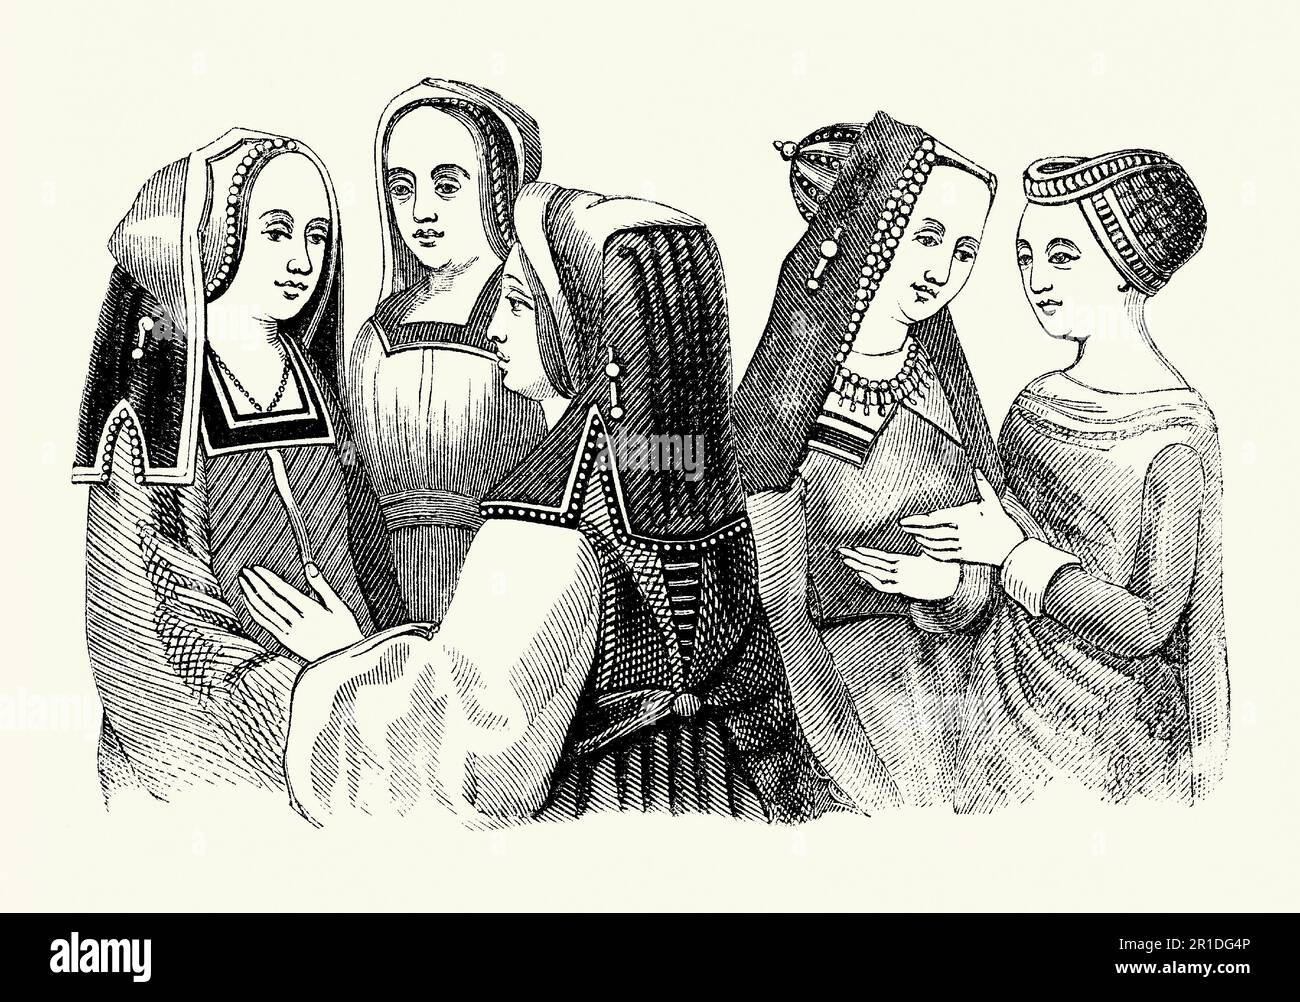 An old engraving of clothing worn by women in Tudor times in England. The style of dress dates from the late 15th and early 16th centuries during the reign of Henry VII (1485–1509). Notable here in women’s attire are what is worn on the head. These embroidered hoods – these sometimes came down below shoulder level – hid most of the hair. The visible hair is braided. The outer dresses were floor length with a square cut bodice and high waist. This attire would have been worn by those in society with money, landed gentry, the nobility and others connected to the royal court. Stock Photo